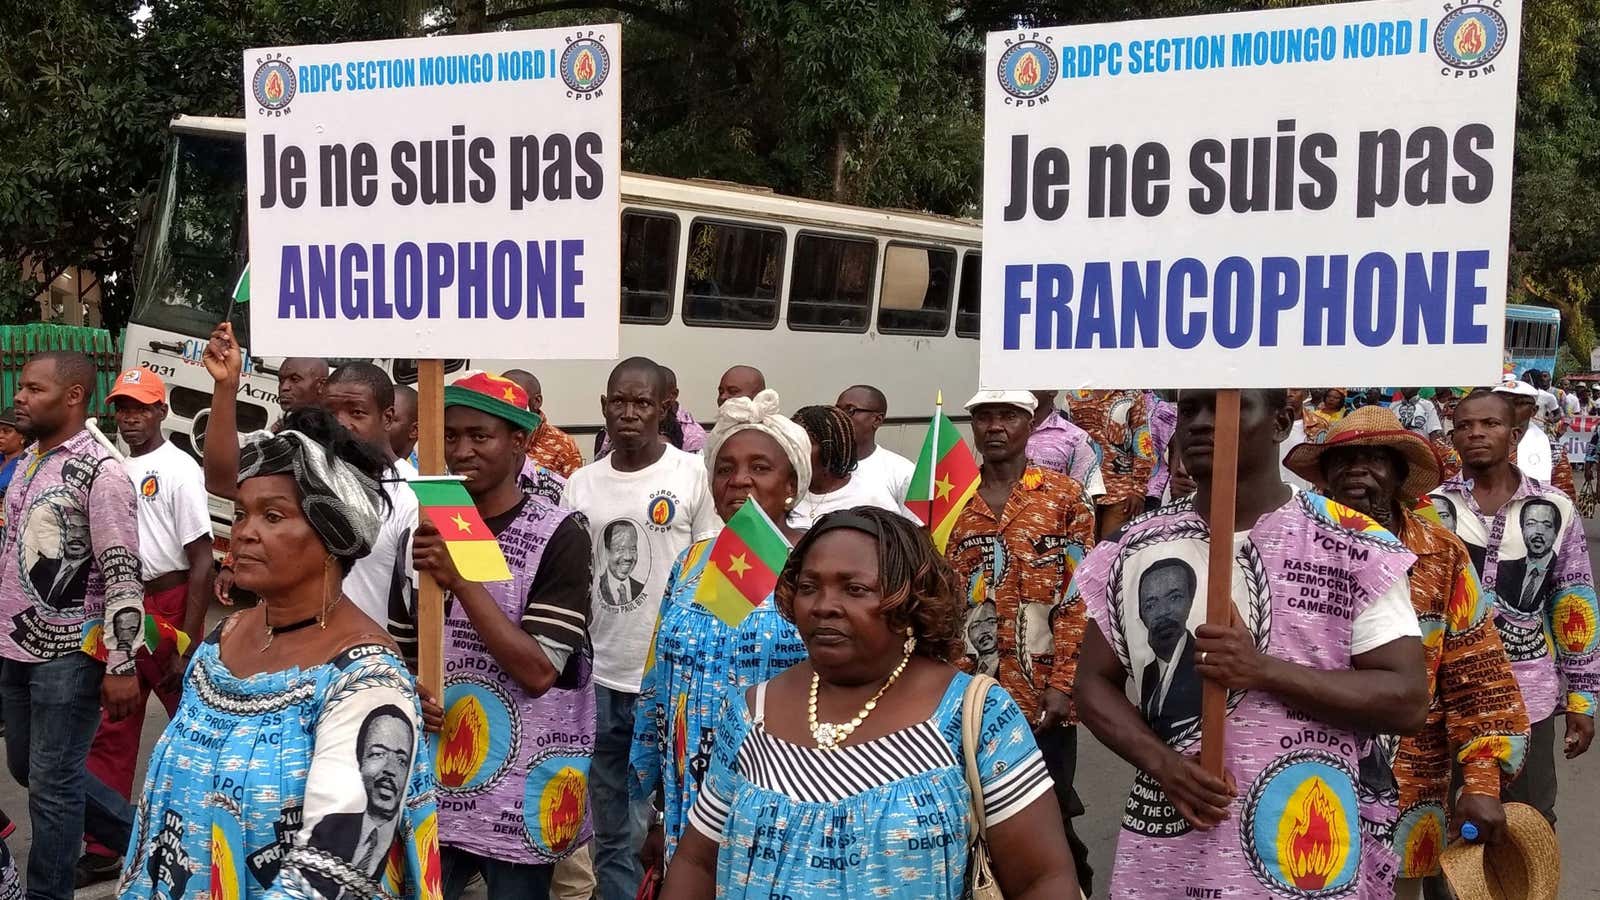 Demonstrators carry banners as they take part in a march voicing their opposition to independence for the Anglophone regions, in Douala, Cameroon October 1, 2017.